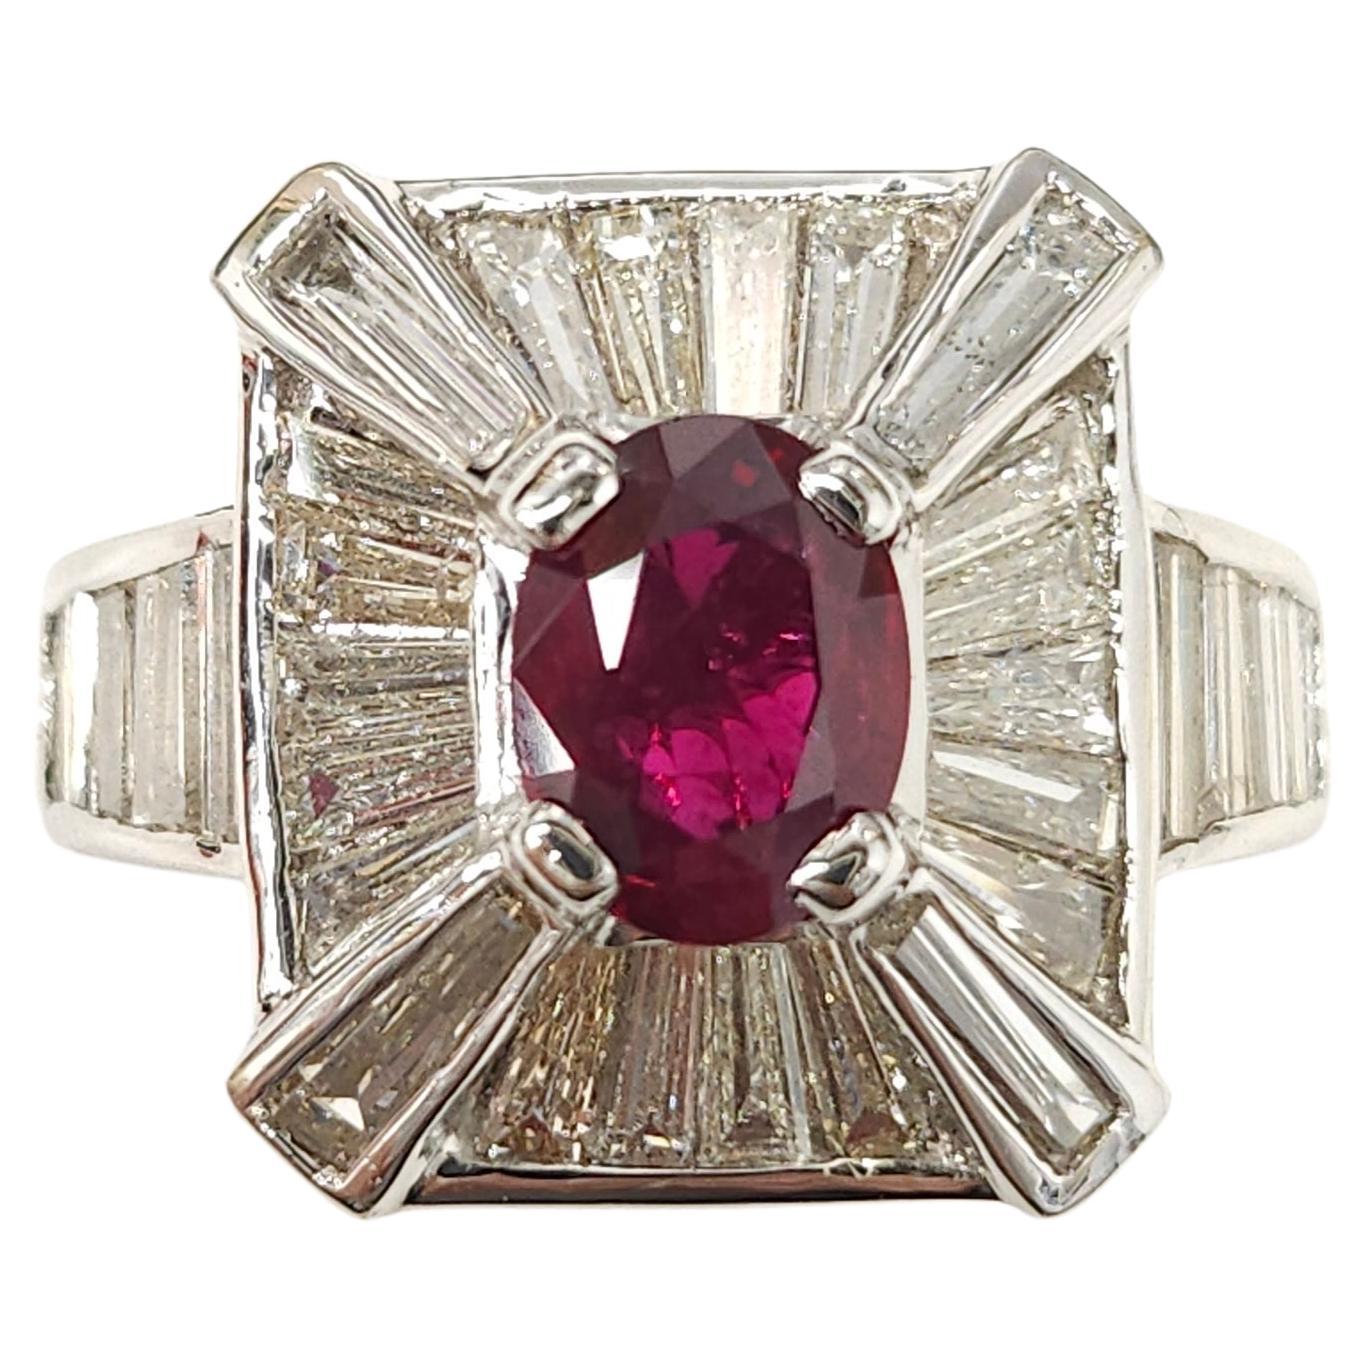 Introducing a stunning piece of jewelry, the IGI Certified 1.19 Carat deep red natural ruby in an exquisite oval shape and surrounded by natural diamonds in an Art Deco style ring. Crafted from 18K White Gold, this ring is a true masterpiece.

At